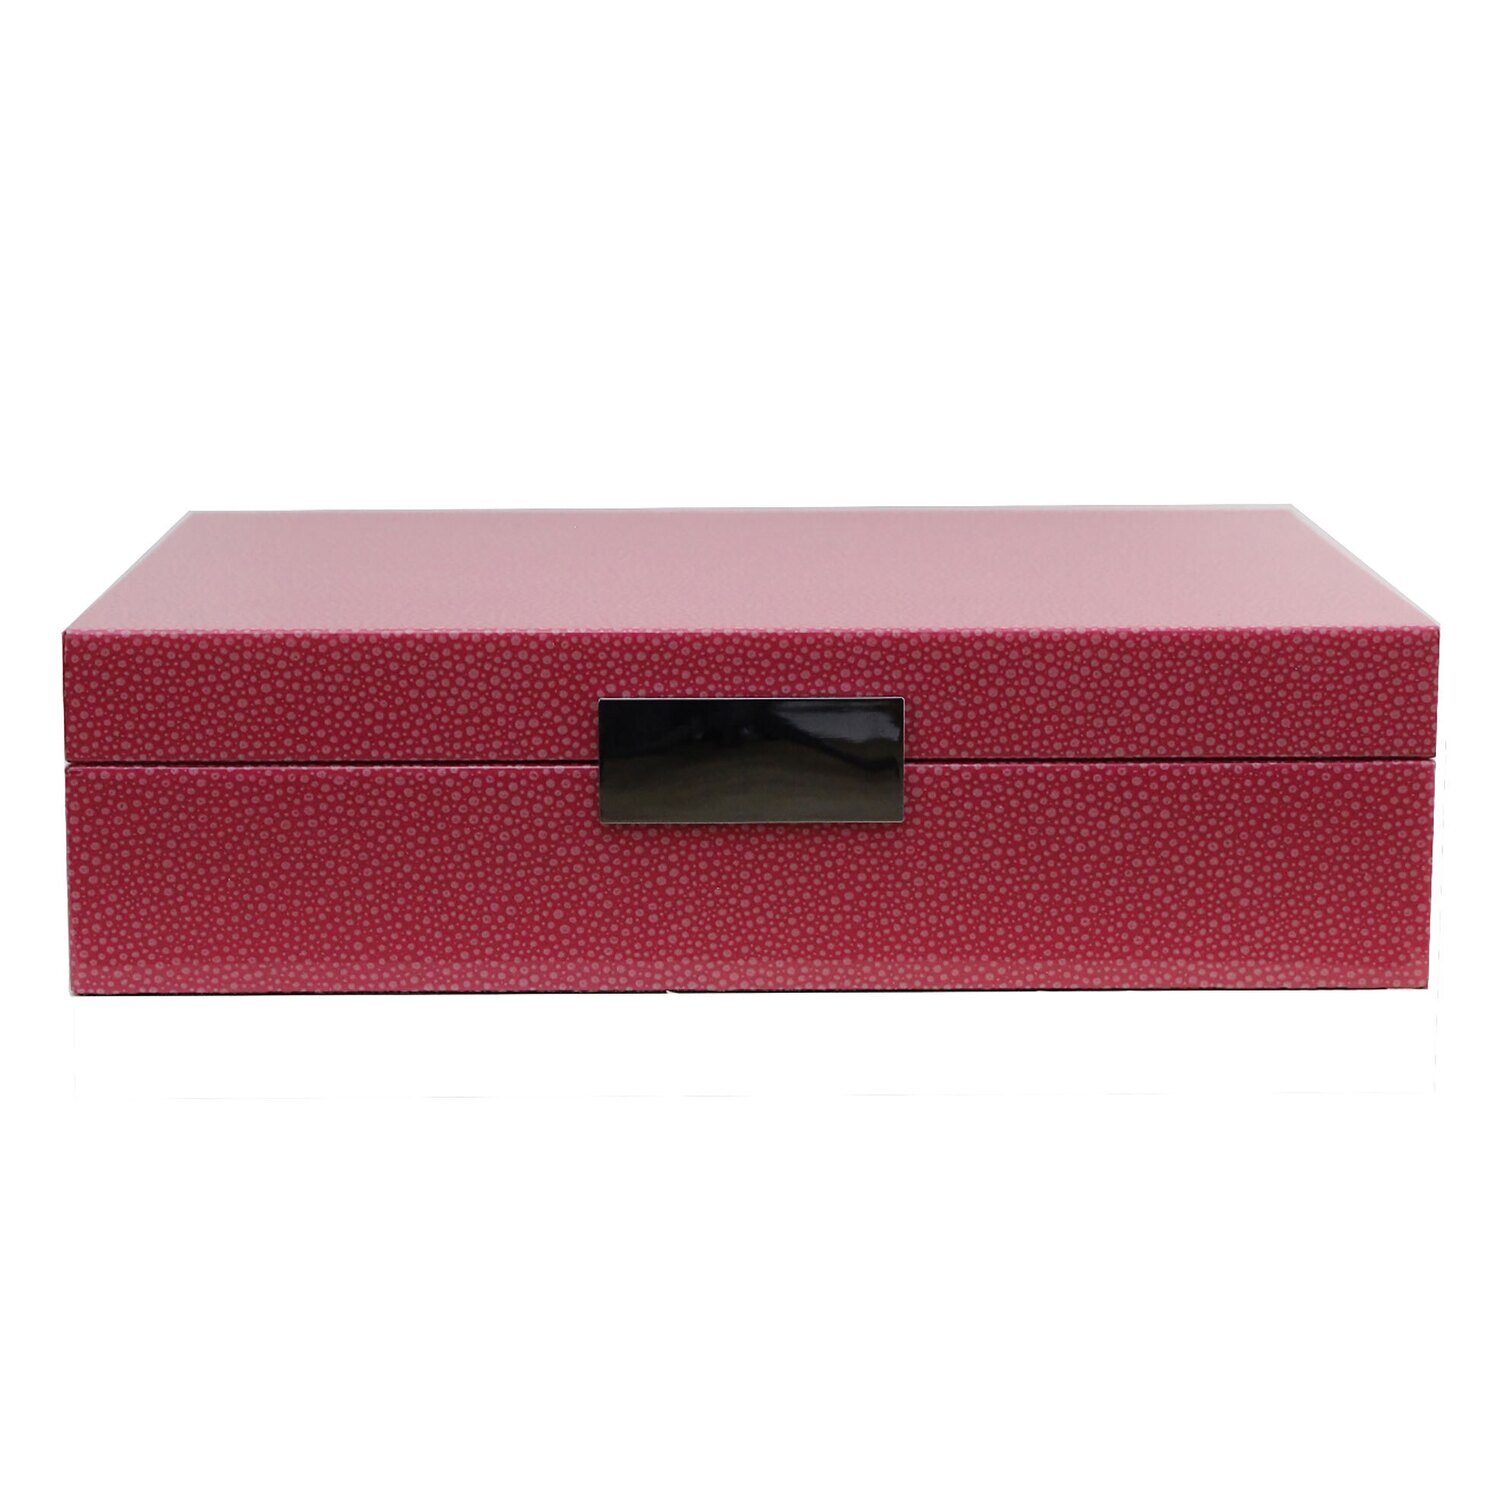 Addison Ross Pink Shagreen Storage Box8 x 11 Inch Lacquer BX1551